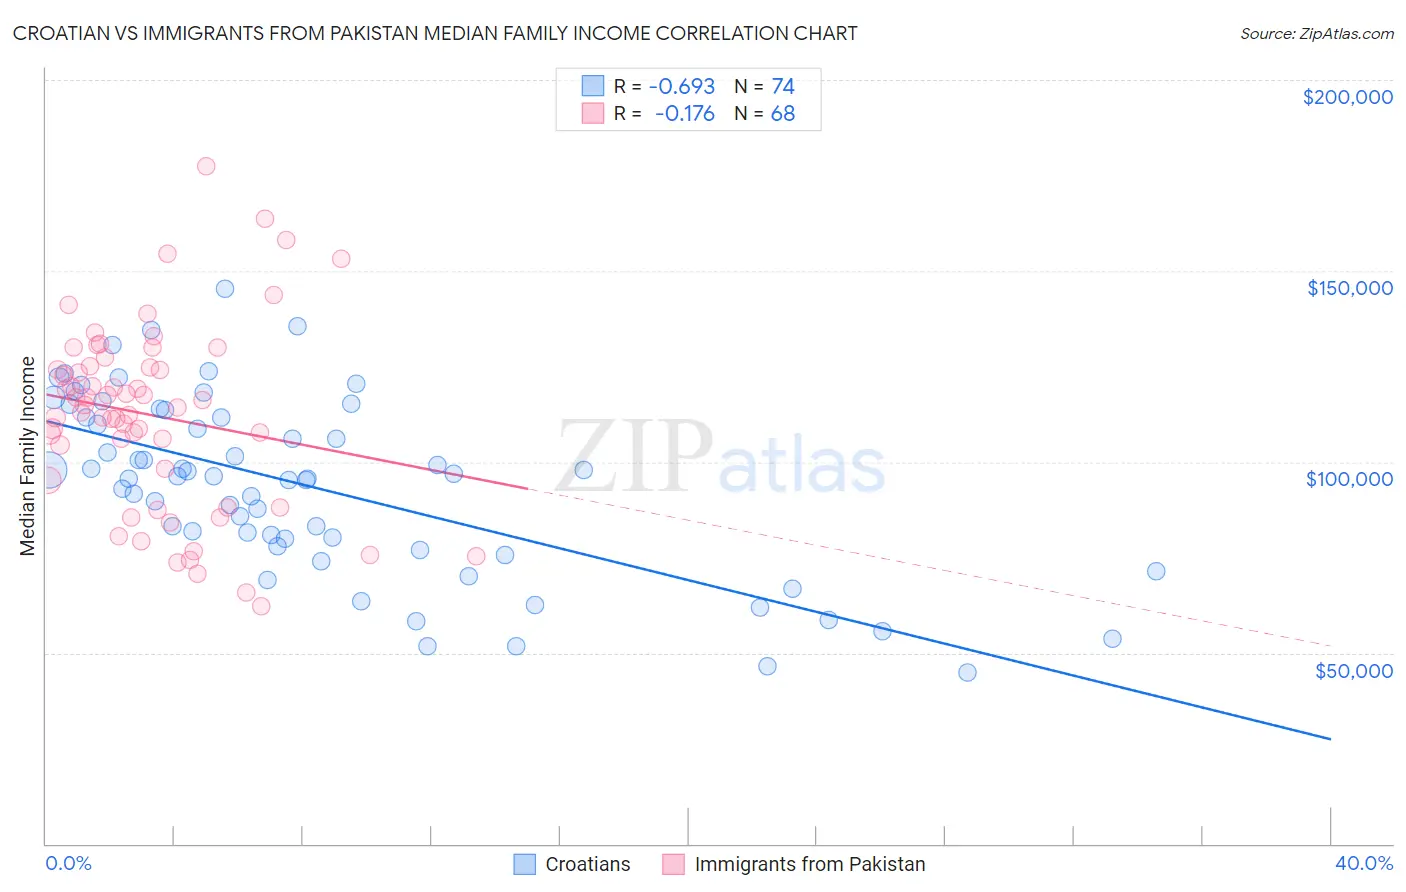 Croatian vs Immigrants from Pakistan Median Family Income